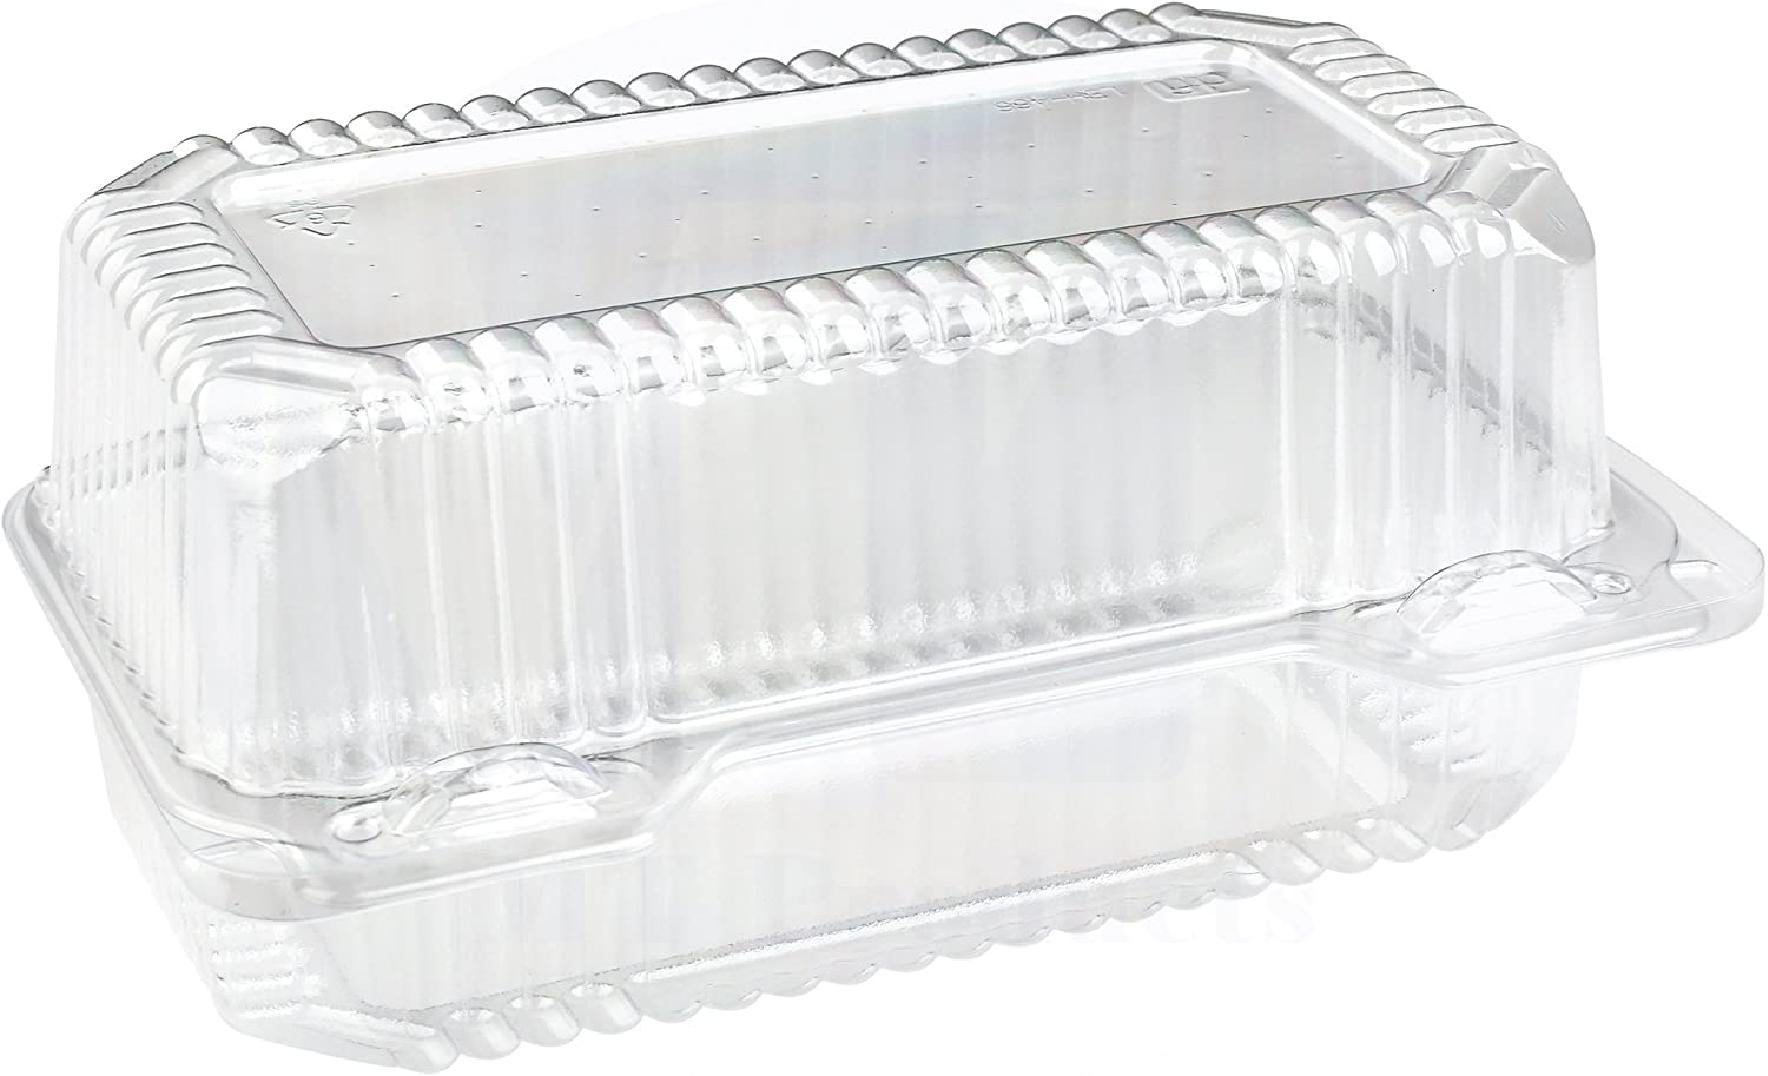 20 oz Square Meat Container with Lid - Divan Packaging